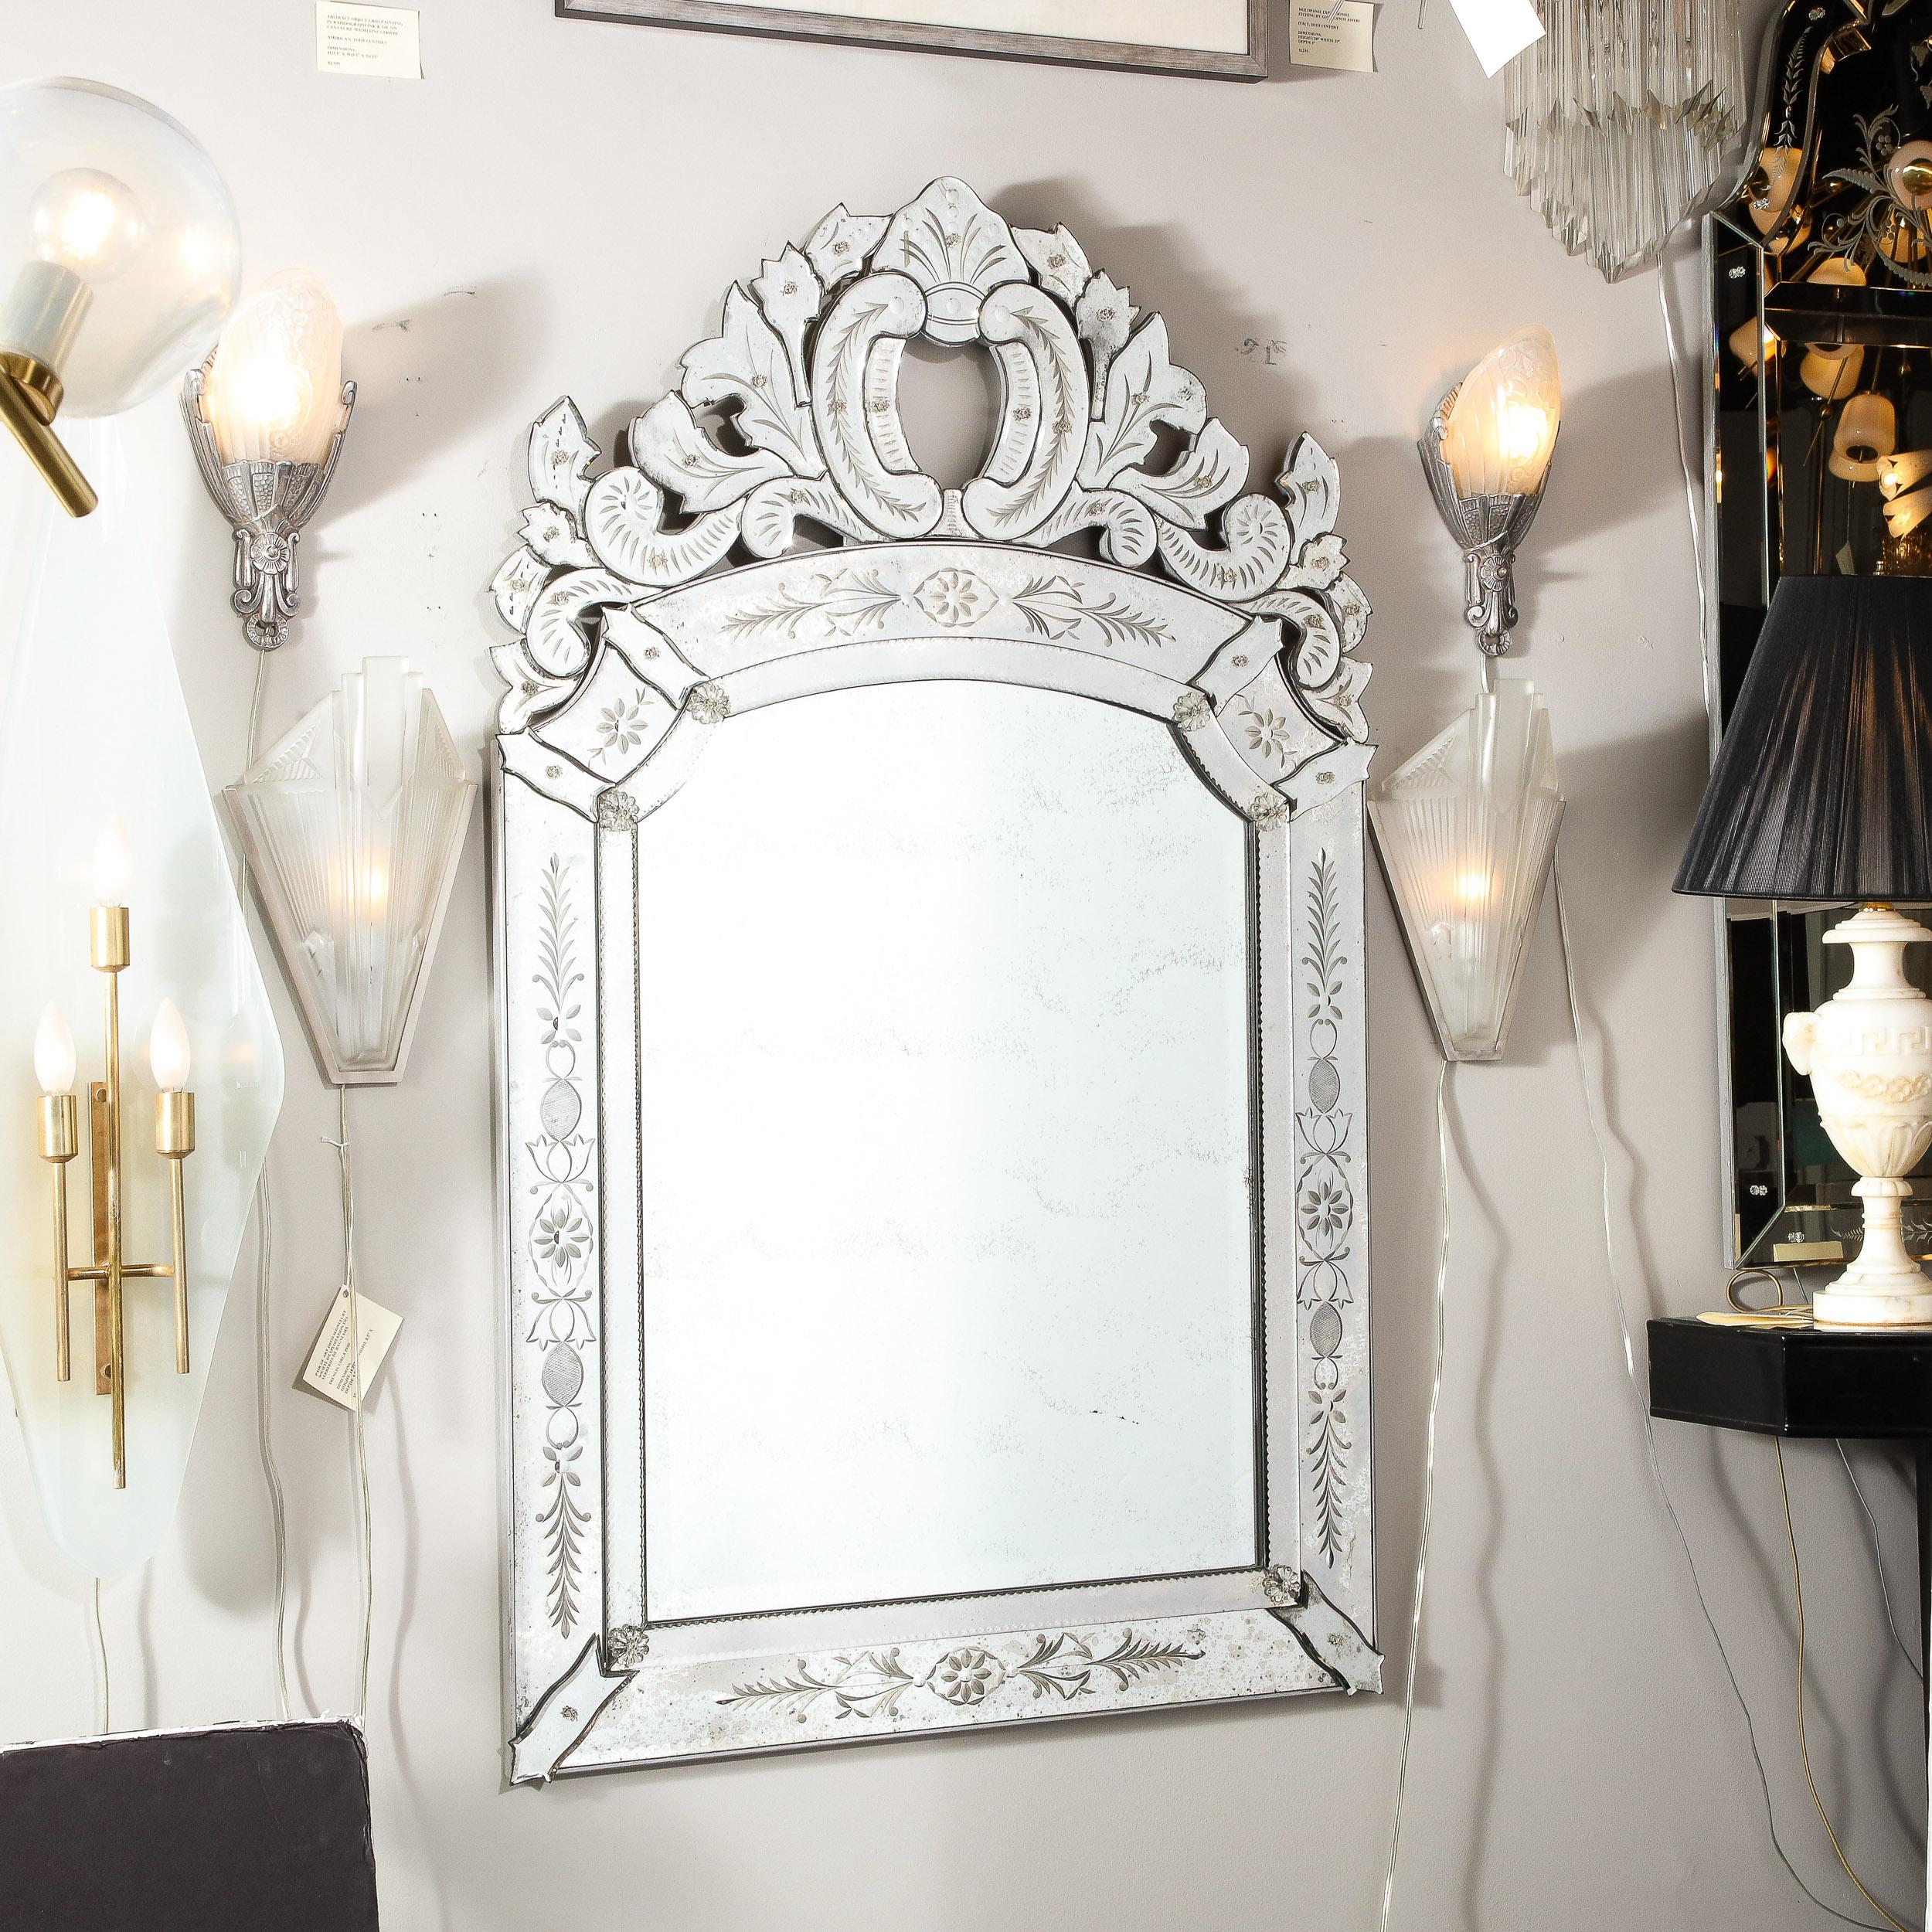 This elegant Mid-Century Modern Venetian mirror was realized in France circa 1950. It offers a subtly smoked and antiqued perimeter- with a plain mirror center- that features rectangular panels on each side and on bottom with notched mirrored